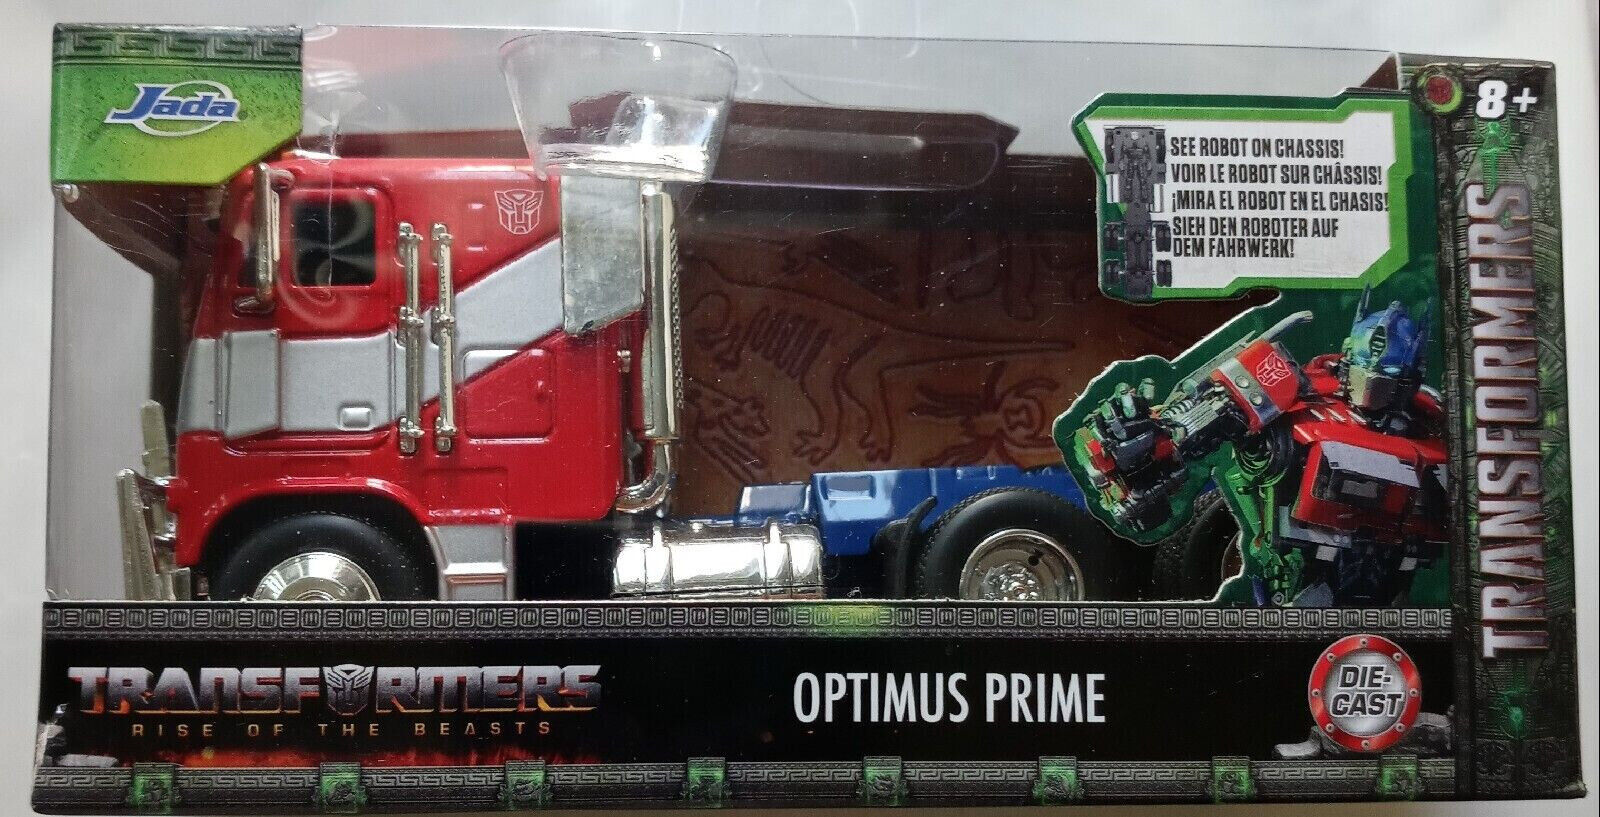 Jada Transformers G1 Style 1:32 Autobots Optimus Prime Diecast Toy Collector Car